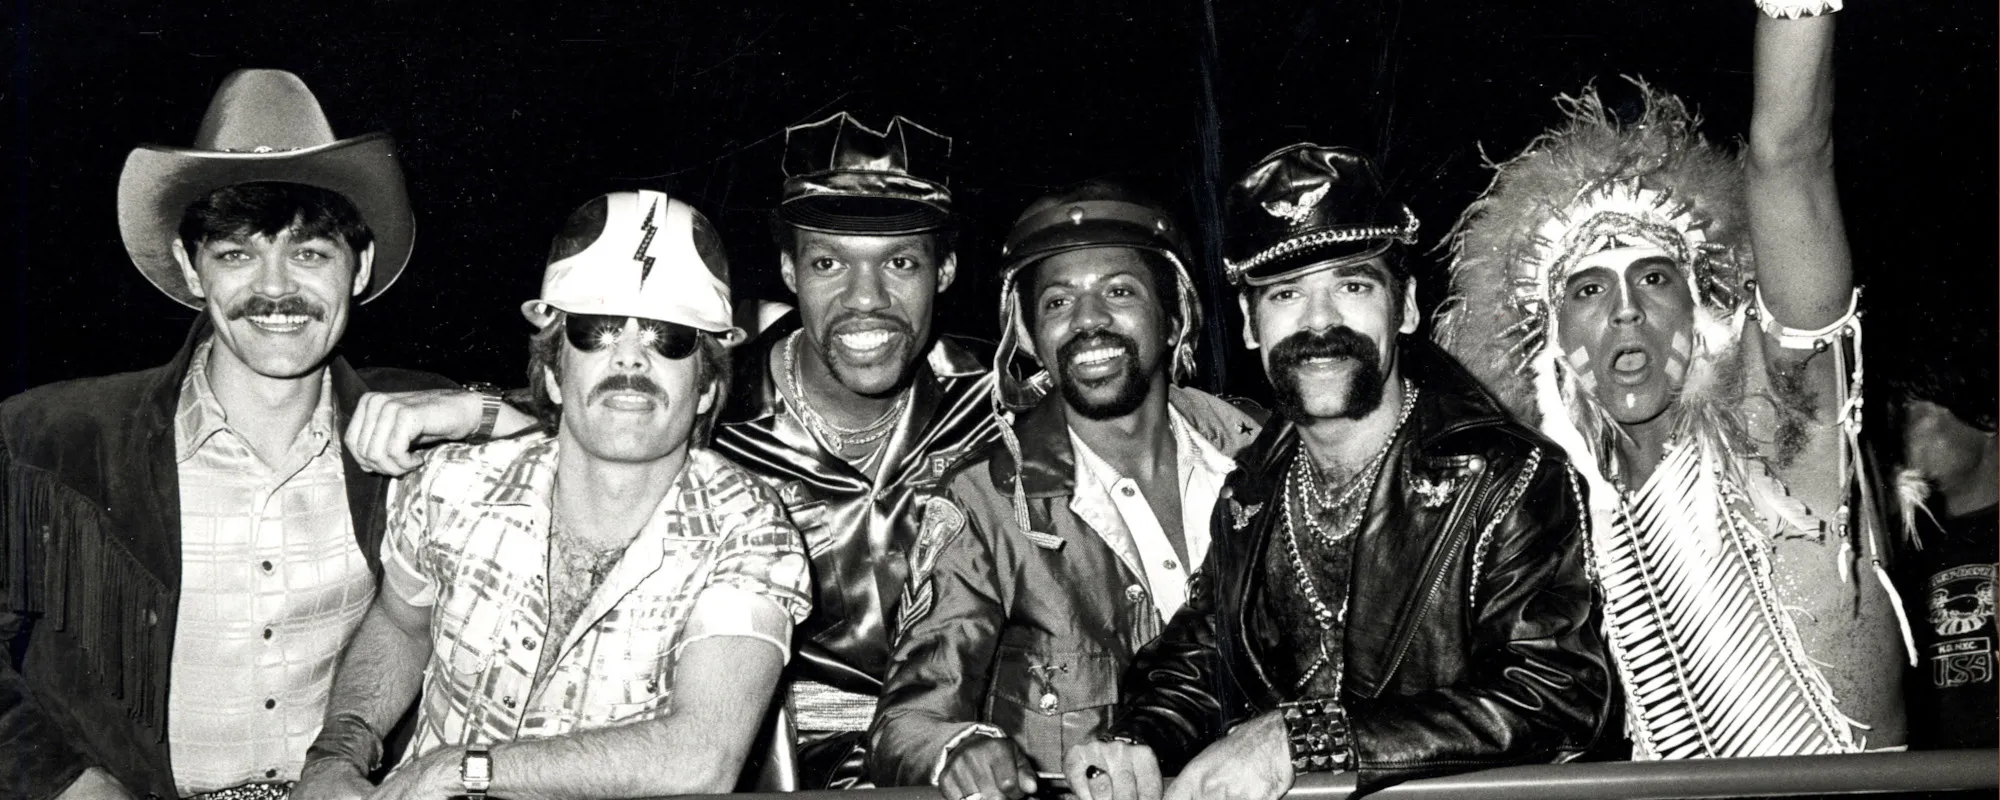 Behind the Meaning of the Classic Hit “Y.M.C.A.” by the Village People